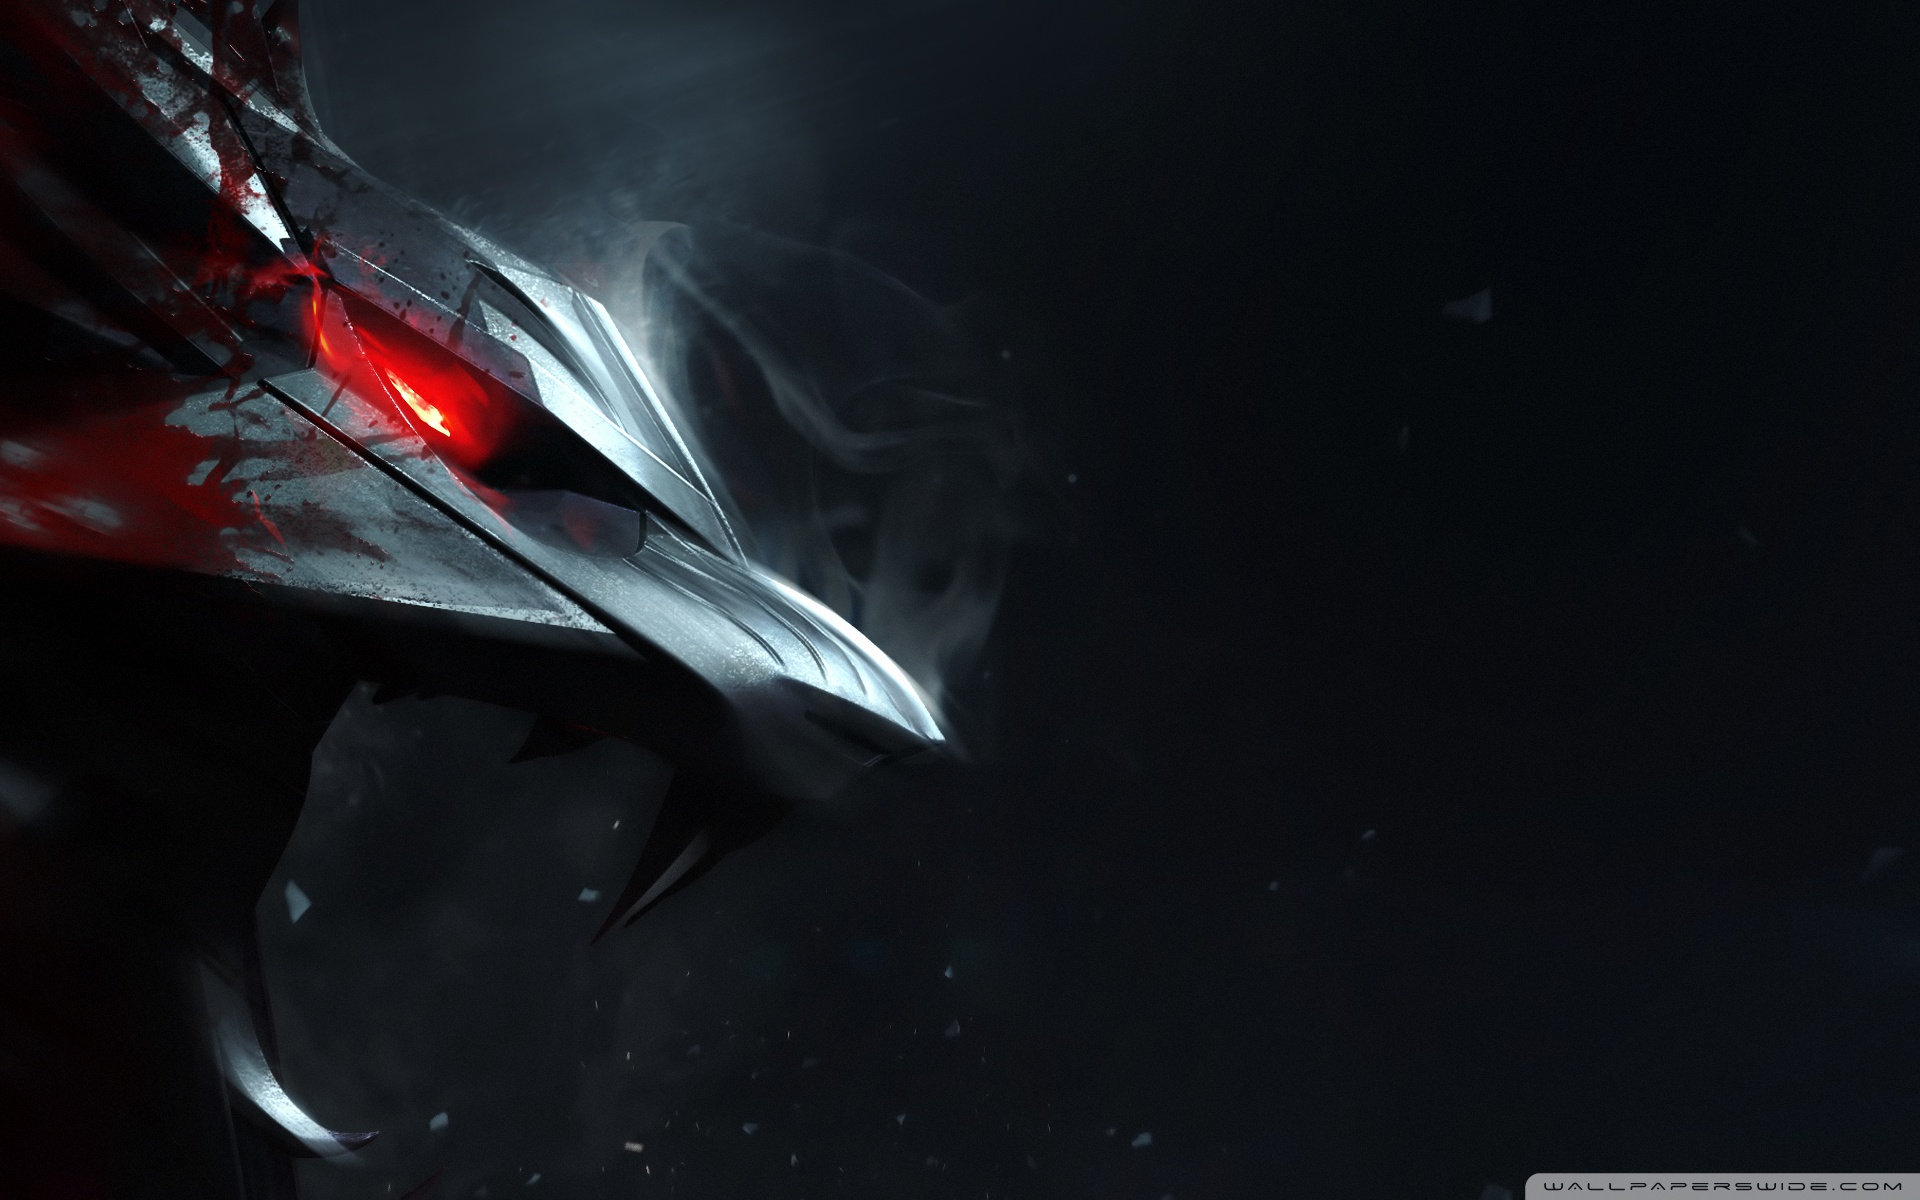 Desktop Wallpapers The Witcher 3: Wild Hunt wolf vdeo game 1366x768